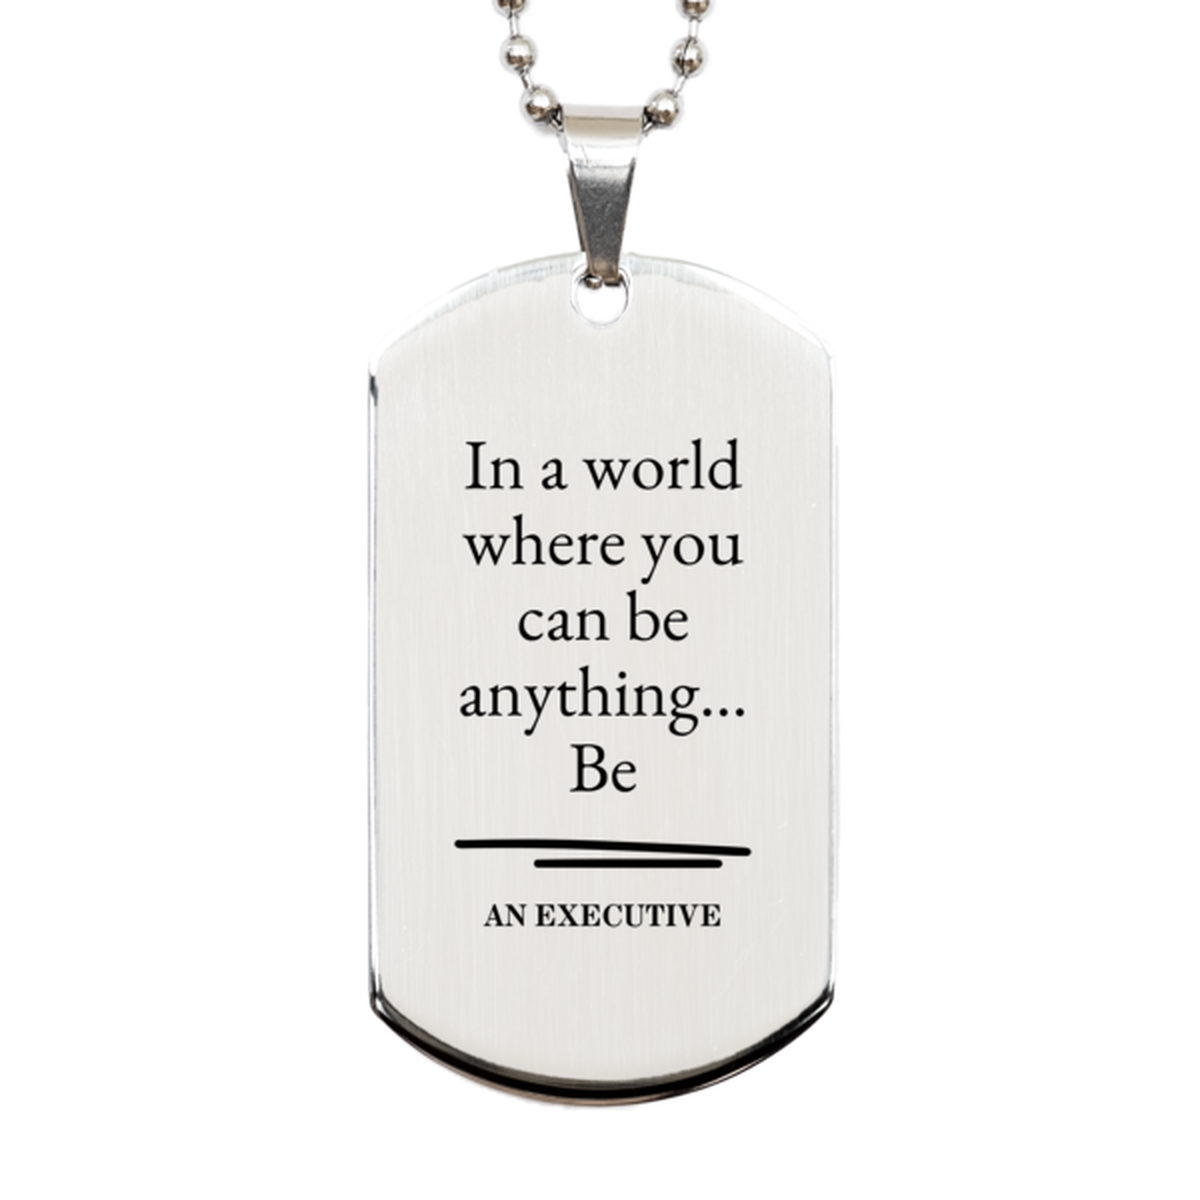 Gifts for Executive, In a world where you can be anything, Appreciation Birthday Silver Dog Tag for Men, Women, Friends, Coworkers